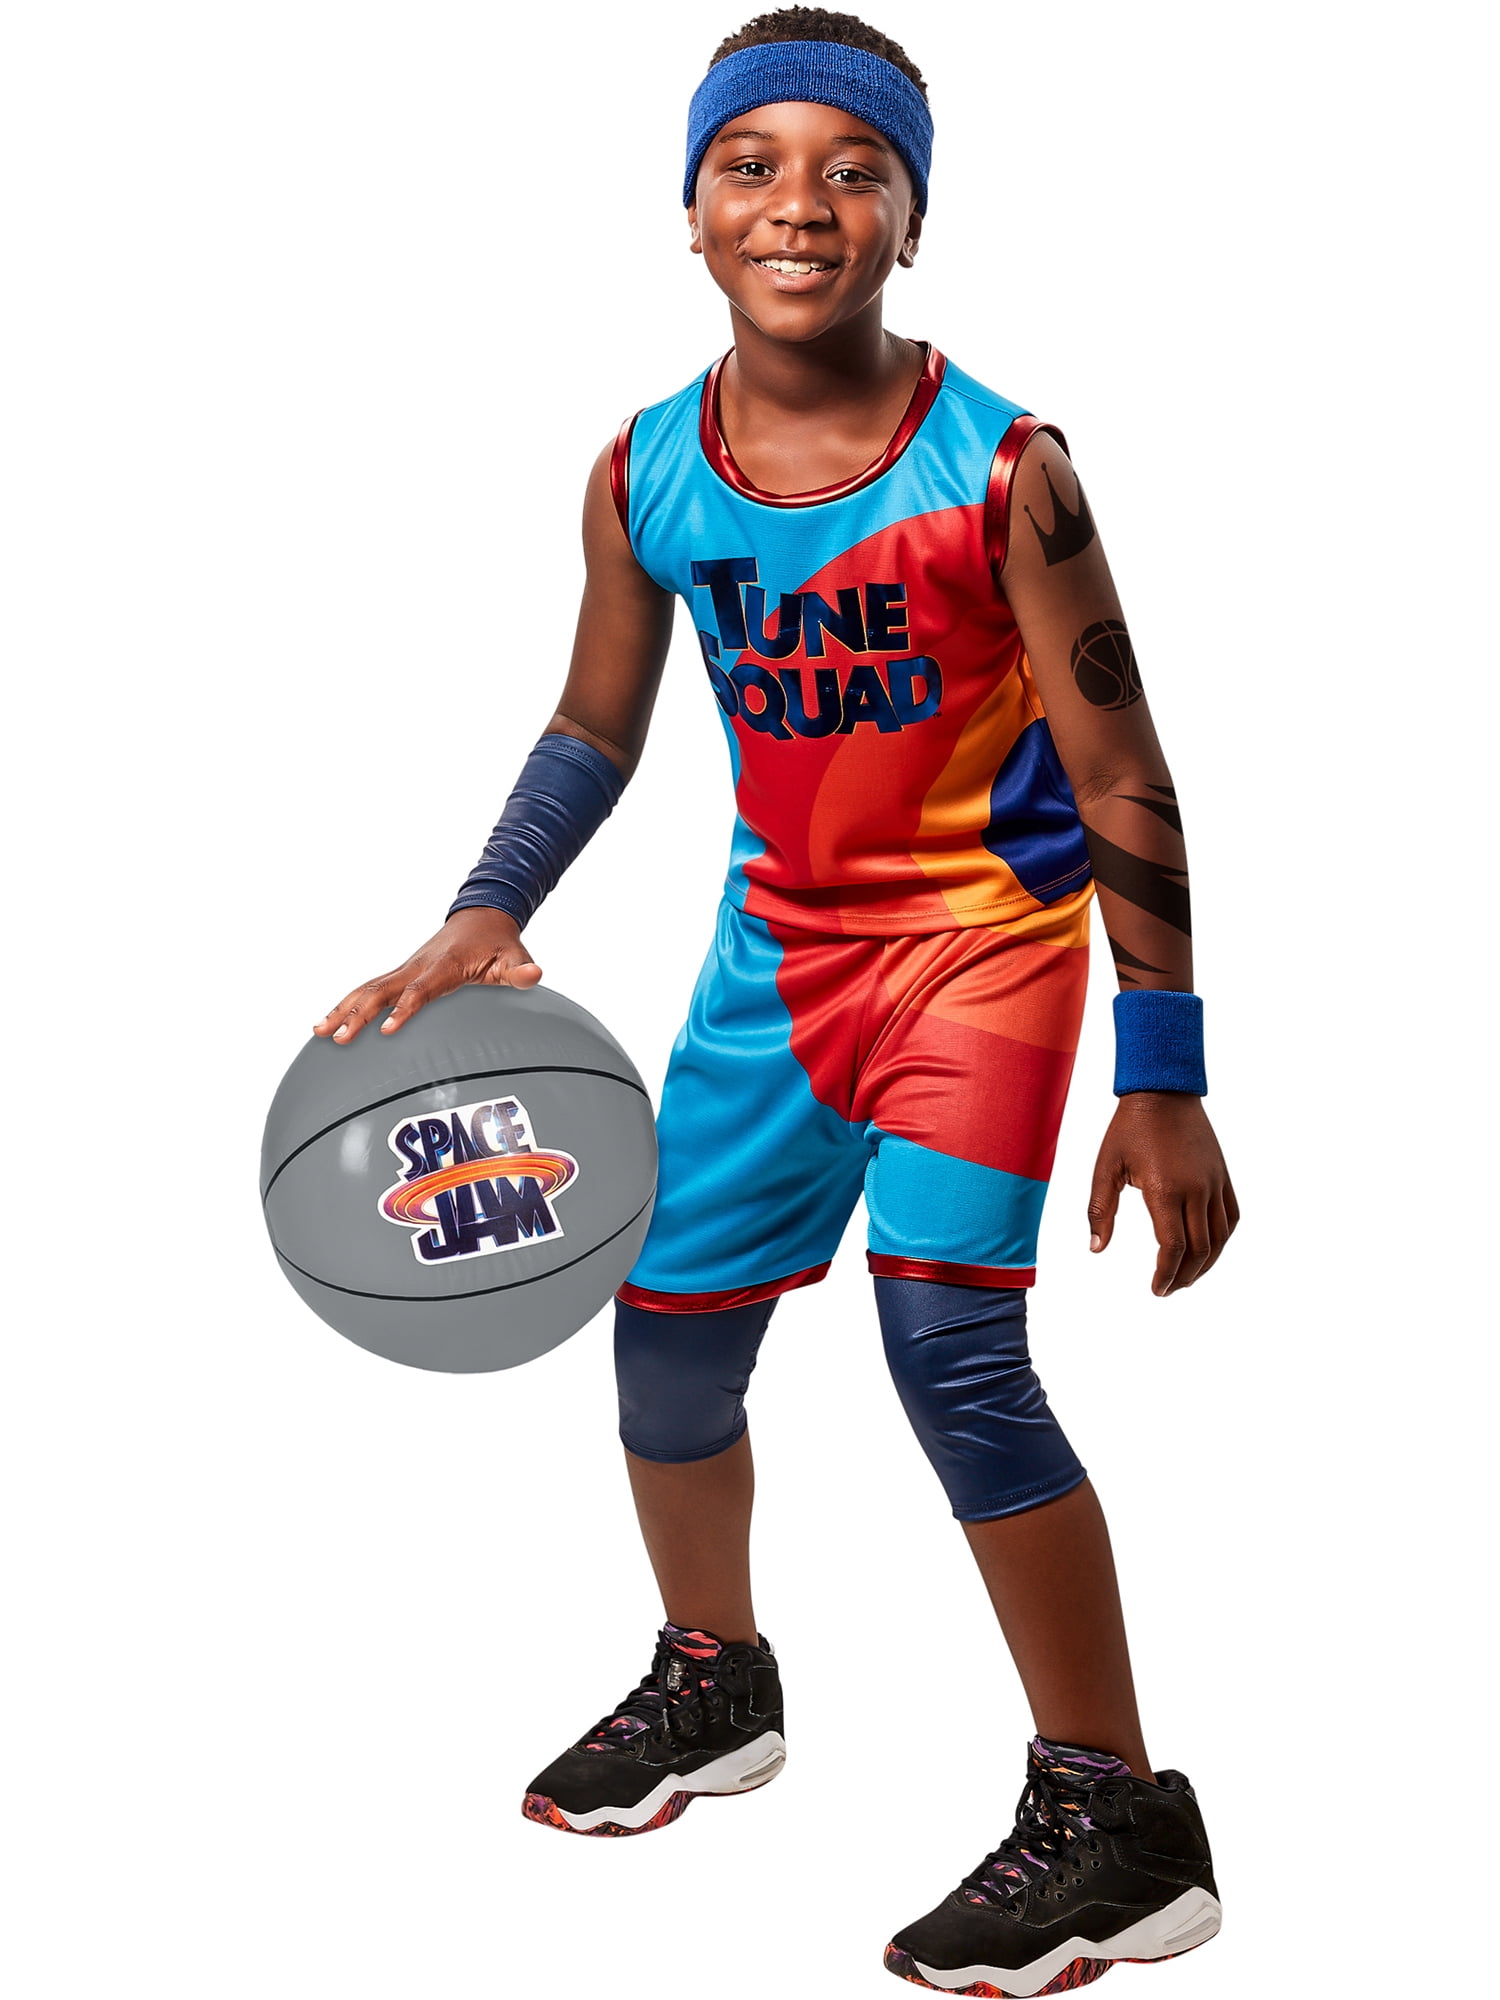 Lebron James Tune Squad Jersey Space Jam 2 New Legacy Basketball Movie 6 Costume 